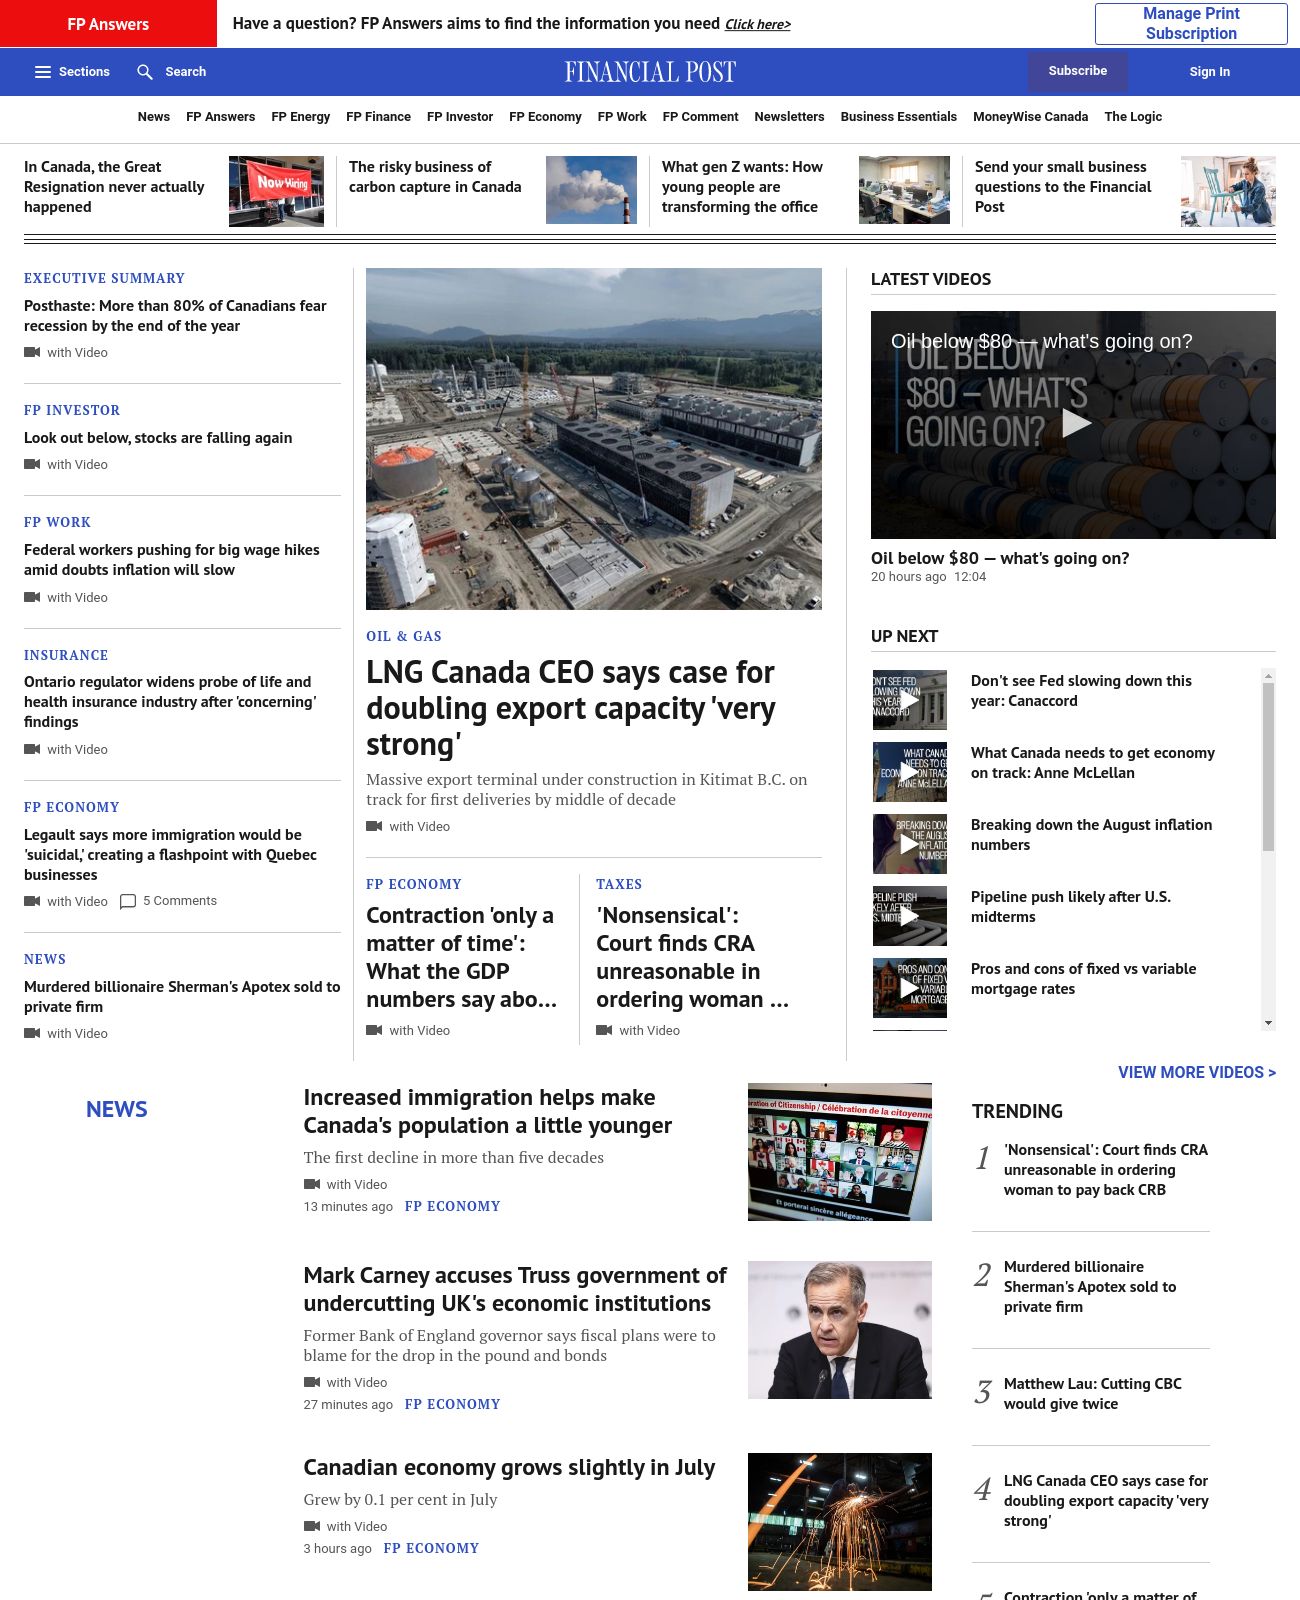 Financial Post at 2022-09-29 13:49:01-04:00 local time